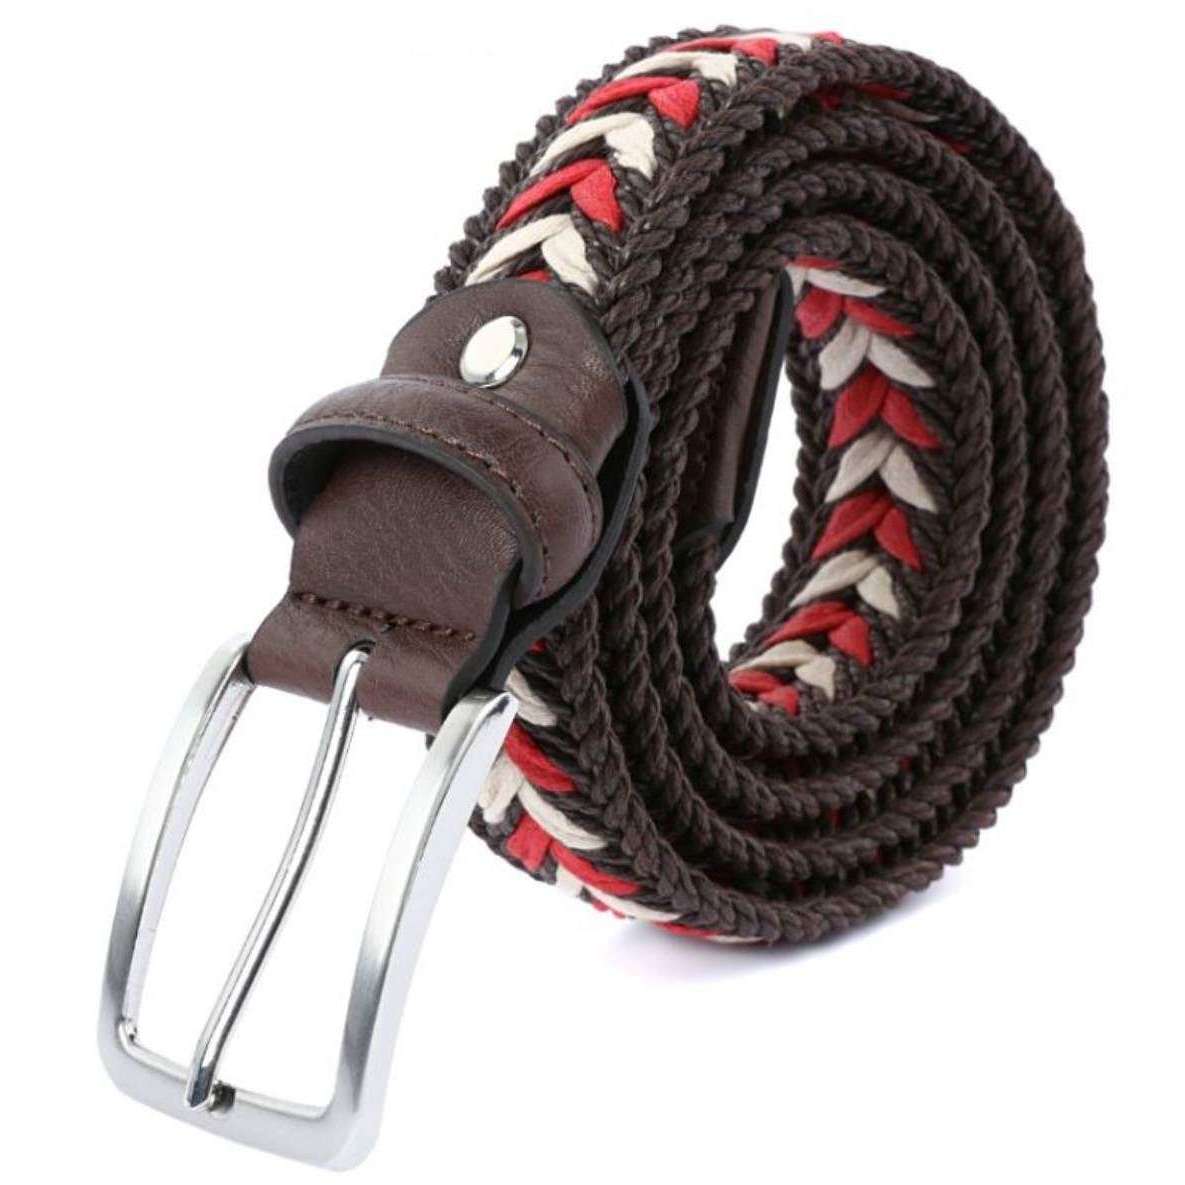 Bassin and Brown Arrow Striped Waxed Rope Braided Belt - Brown/Red/Beige